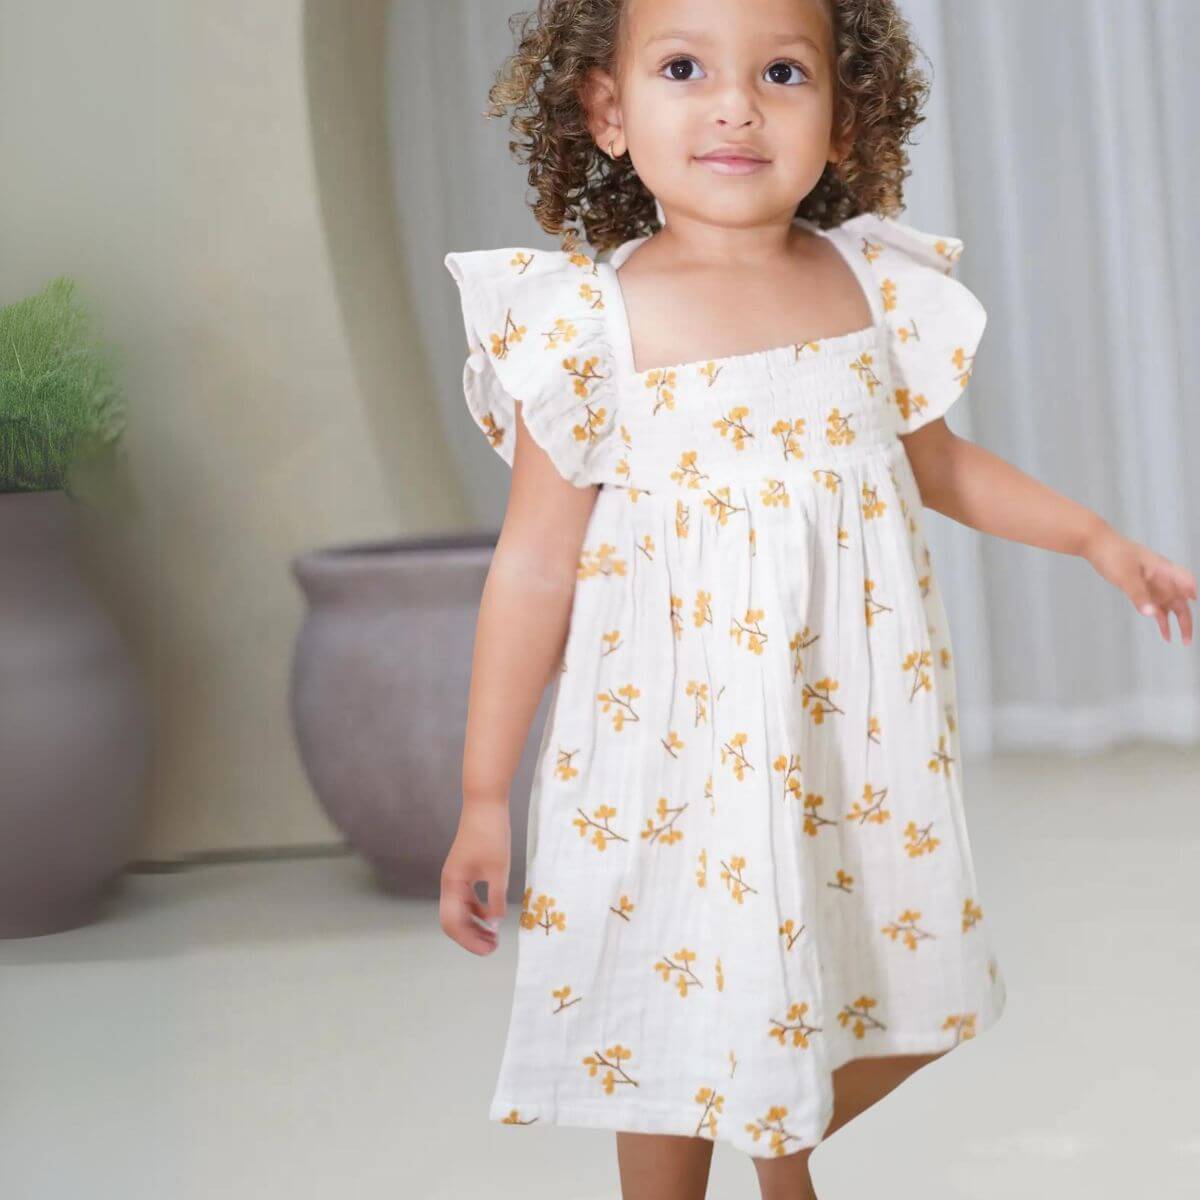 Haven Organic Baby / Toddler Floral Dress - Ecru Front view on Model